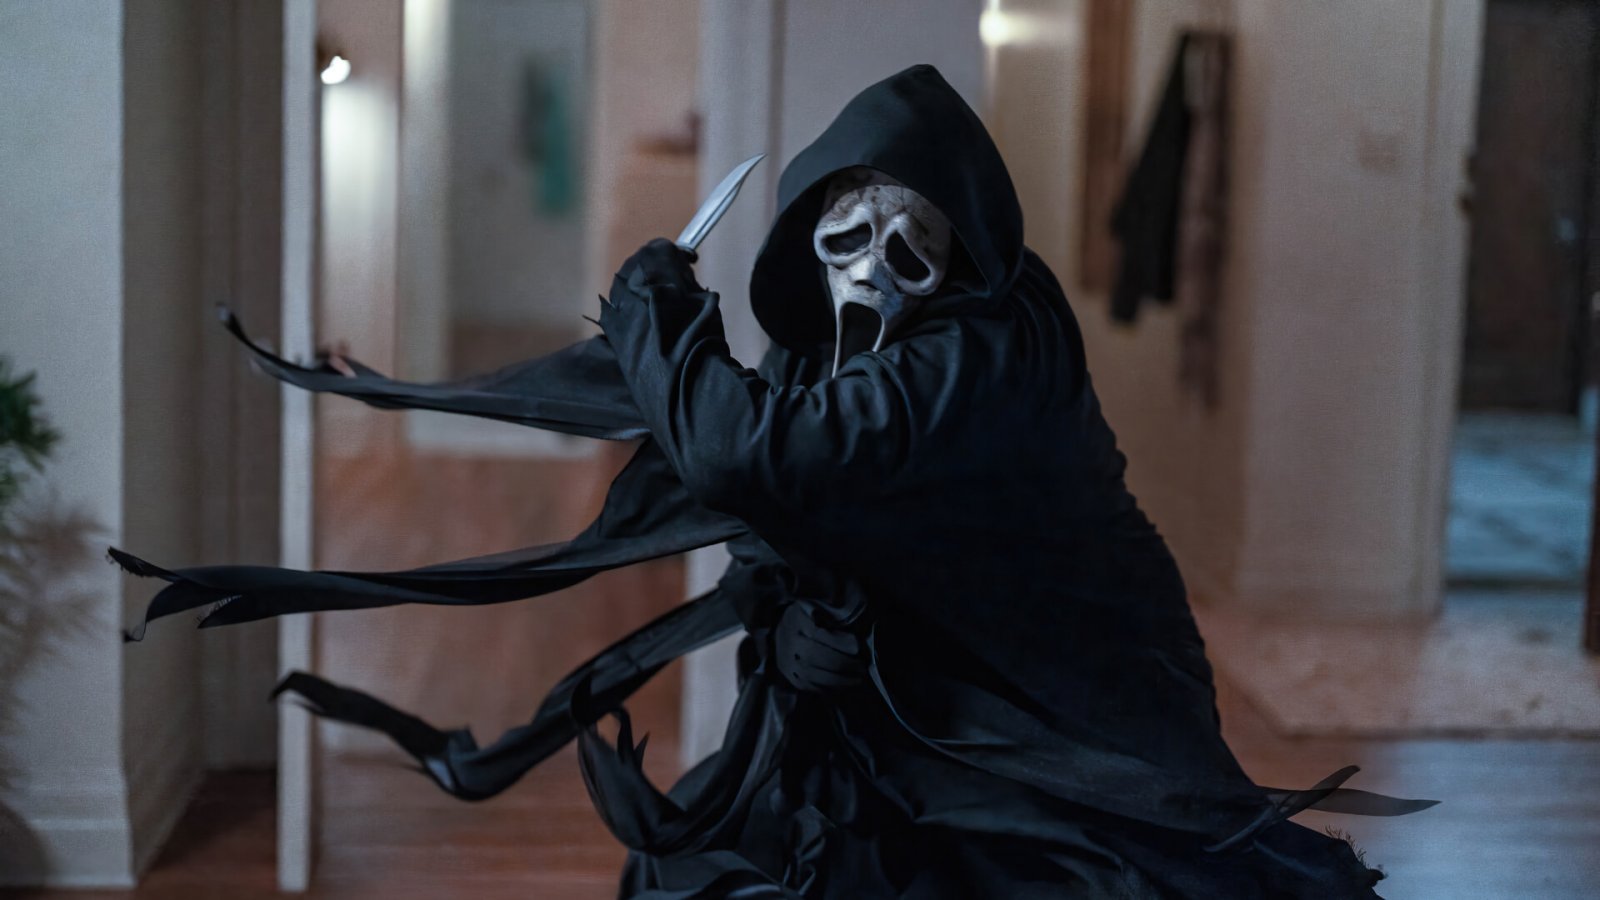 Scream VI surpasses 100 million at the box office, record numbers for the new film in the franchise